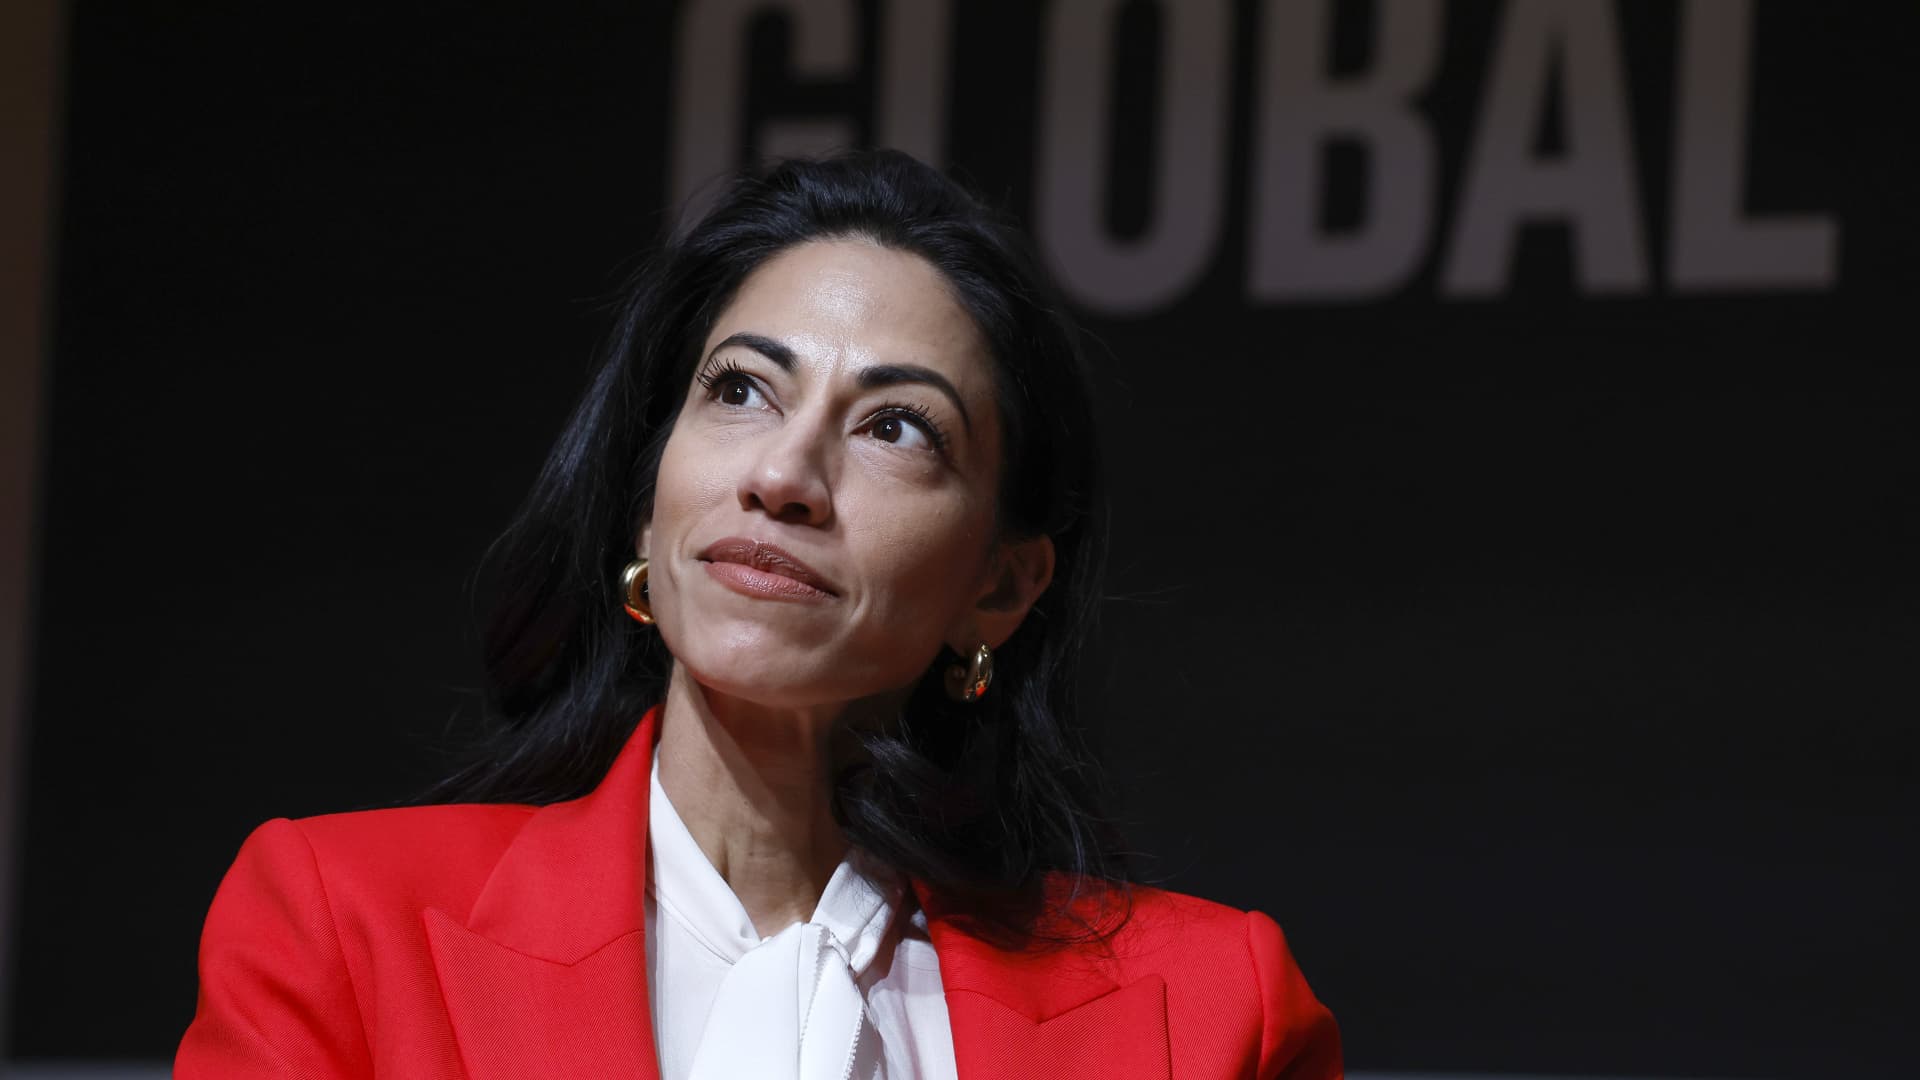 Huma Abedin reveals the ‘life-changing’ career advice Hillary Clinton gave her